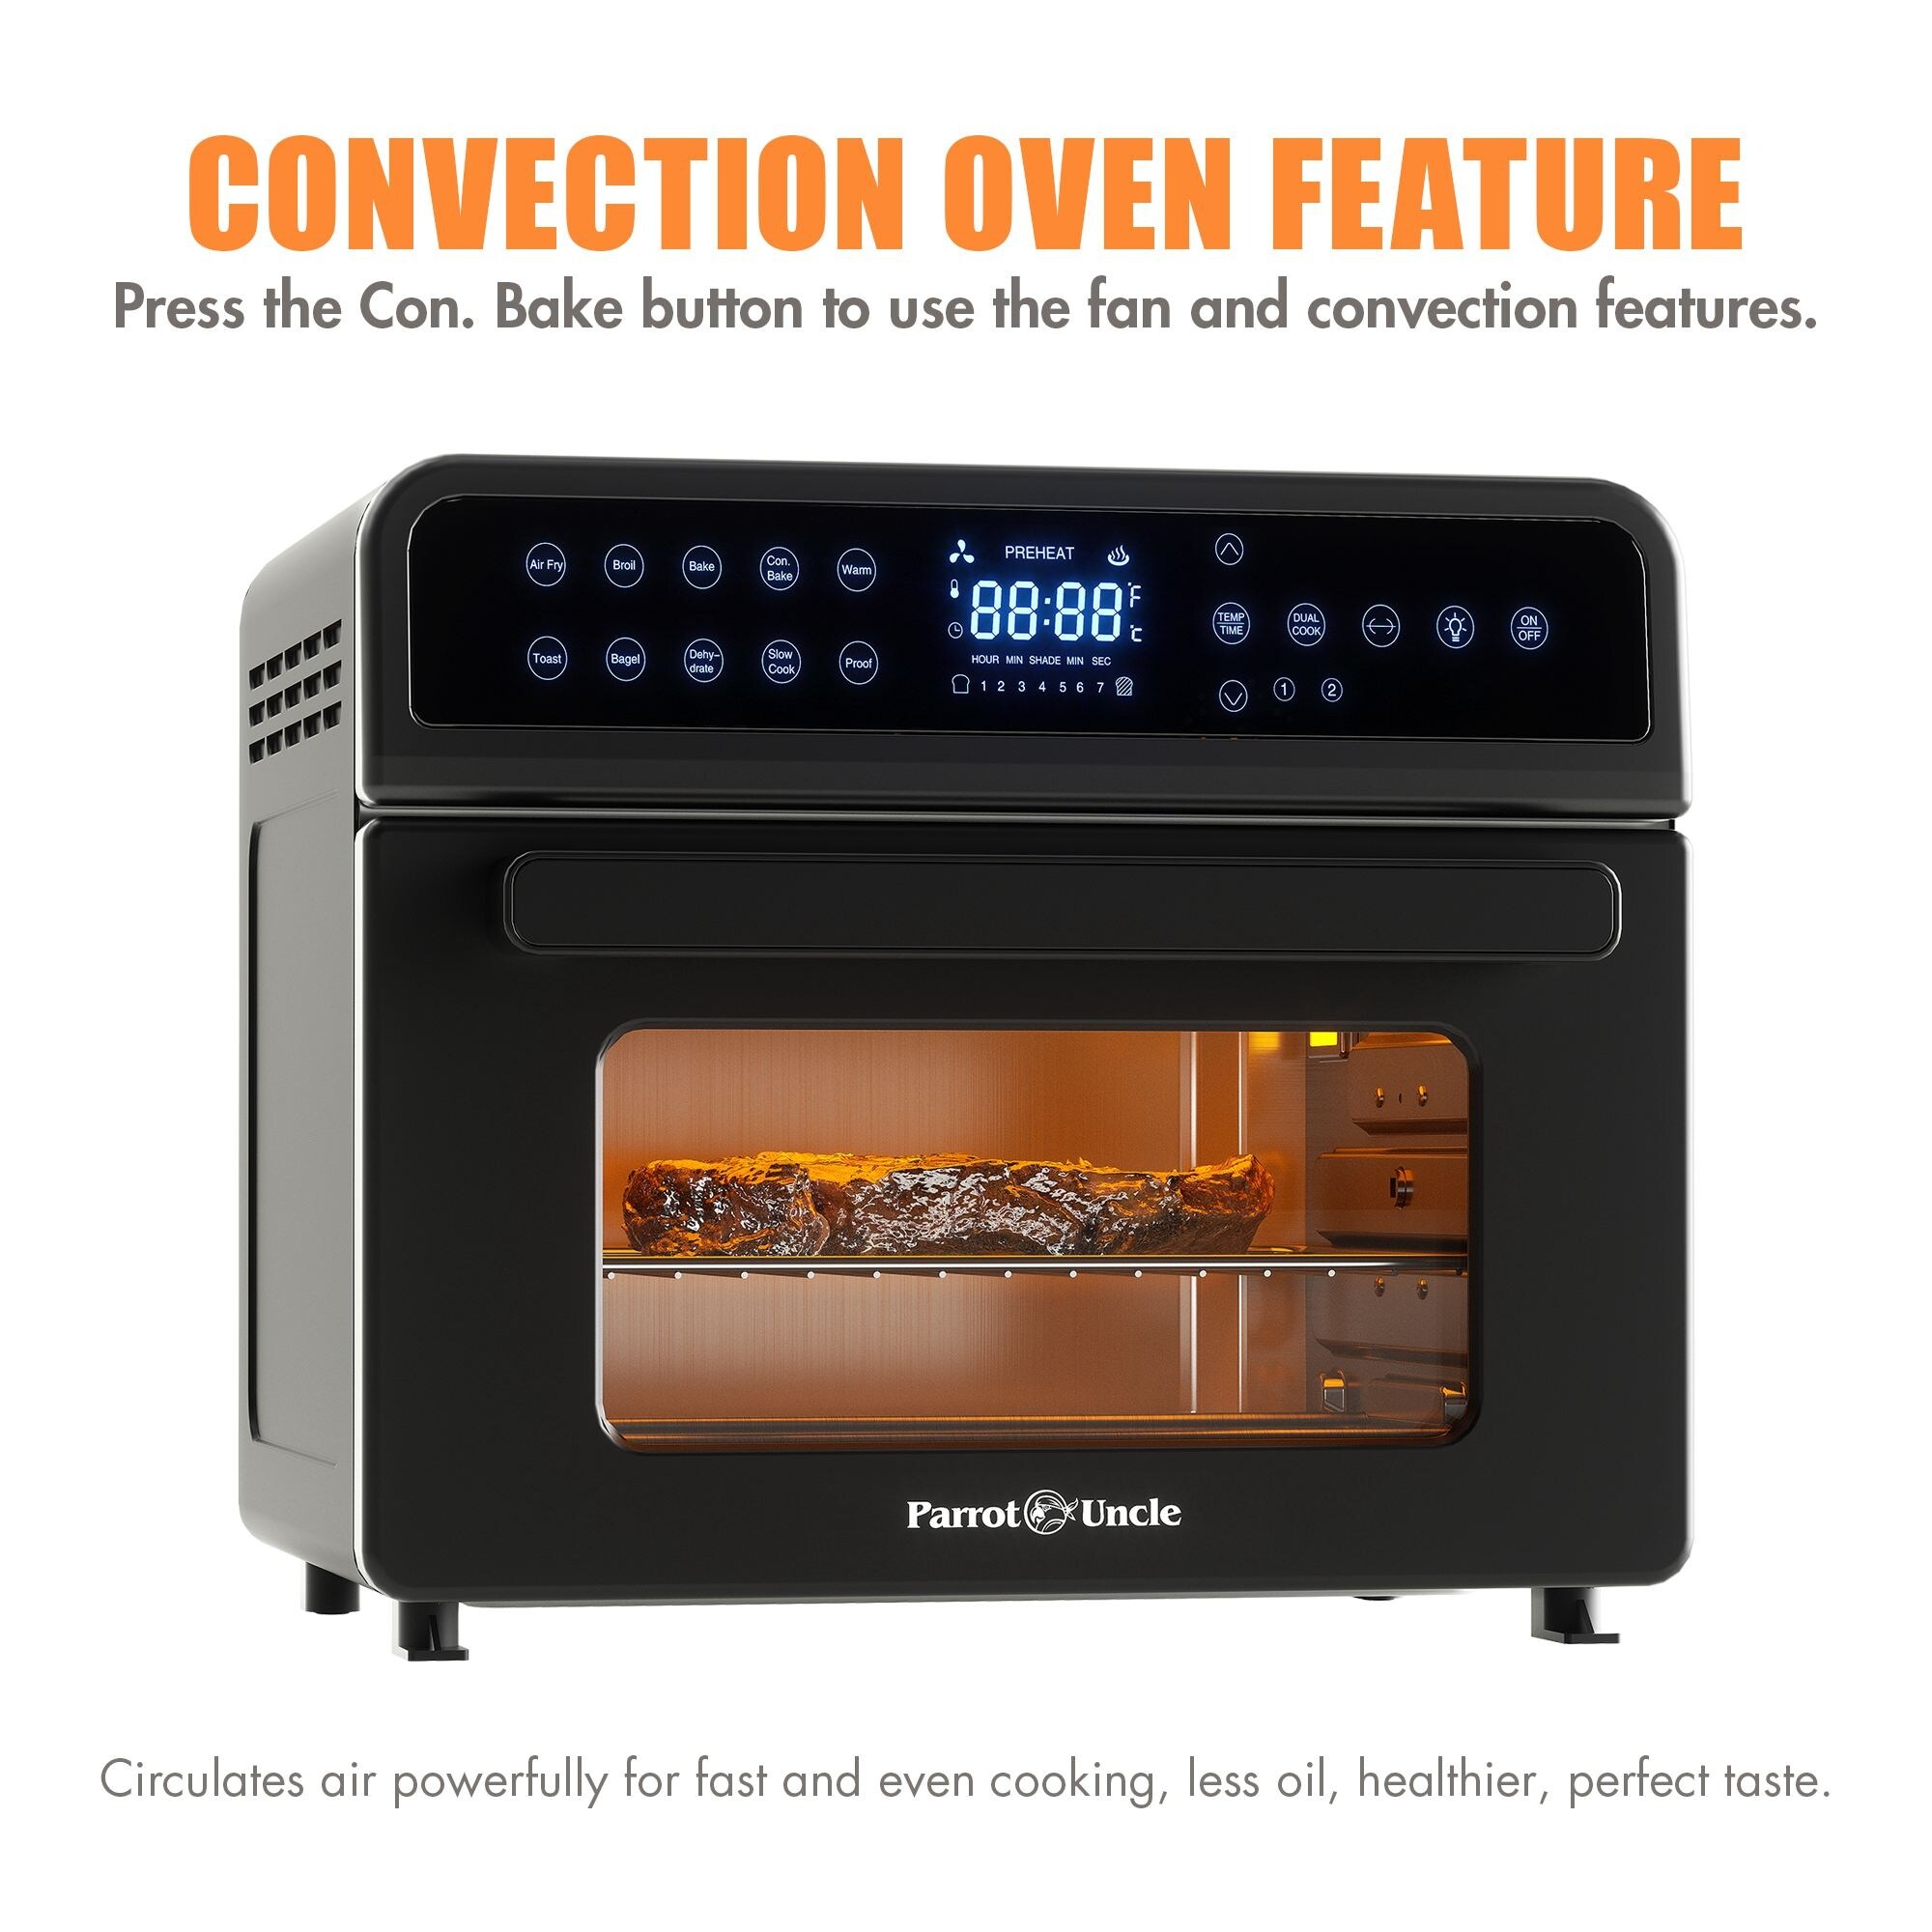 10-in-1 Multi Functinal 23.3 Quart Toaster Oven Air Fryer